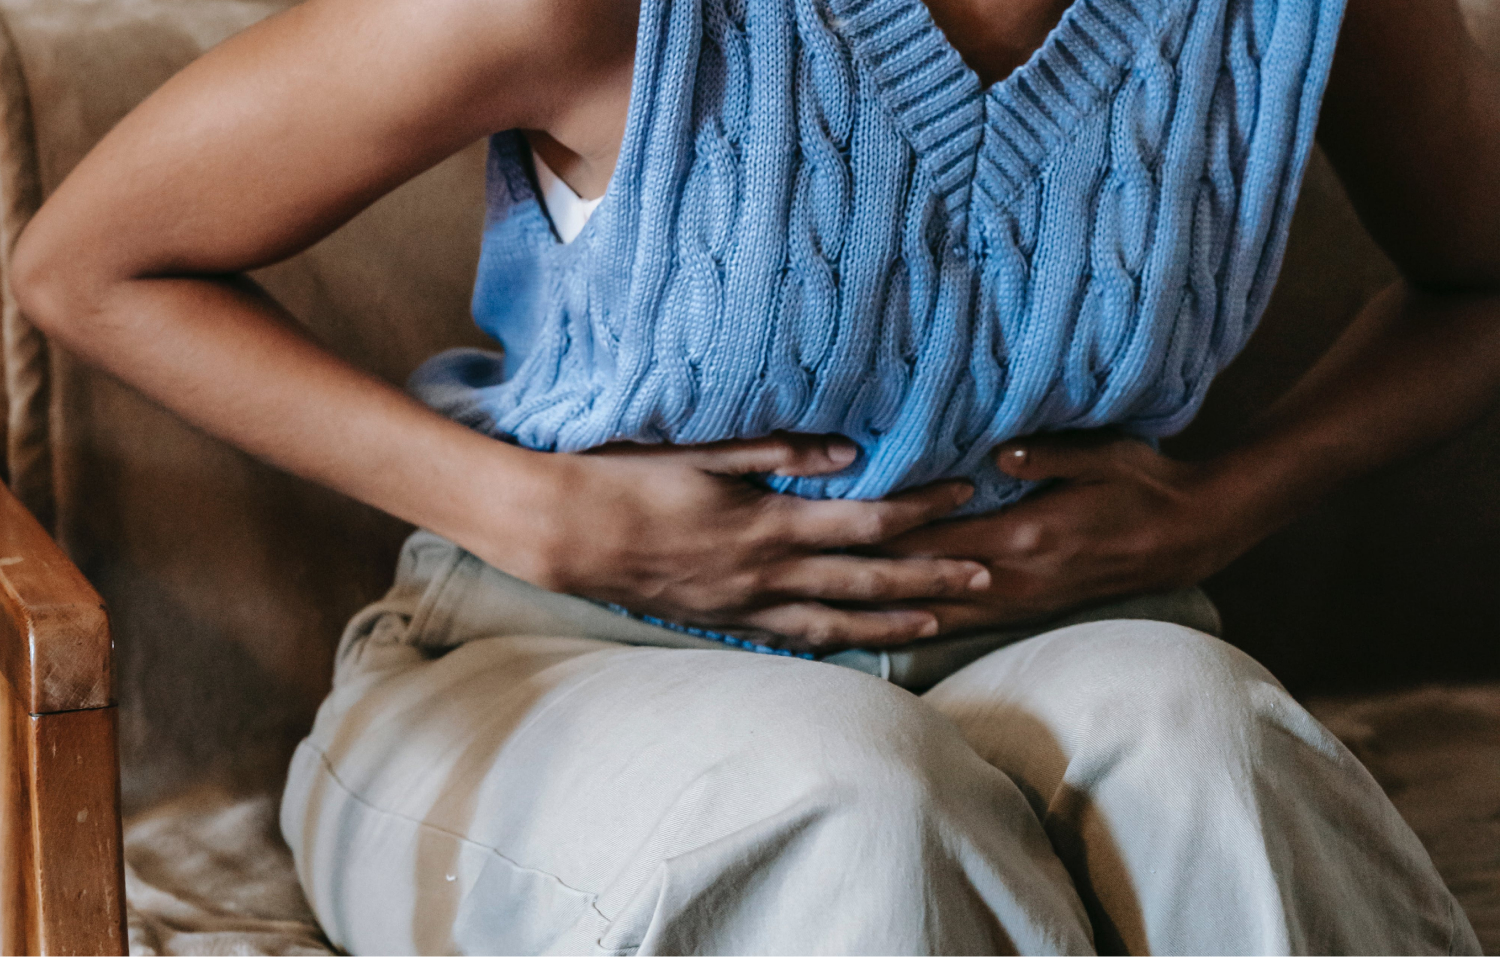 Close-up of an unidentifiable individual seated in a brown vintage armchair, wearing a sleeveless blue cable-knit sweater and beige trousers, with hands clasped over the abdomen, possibly suggesting rest or discomfort, in a room with soft, natural lighting.